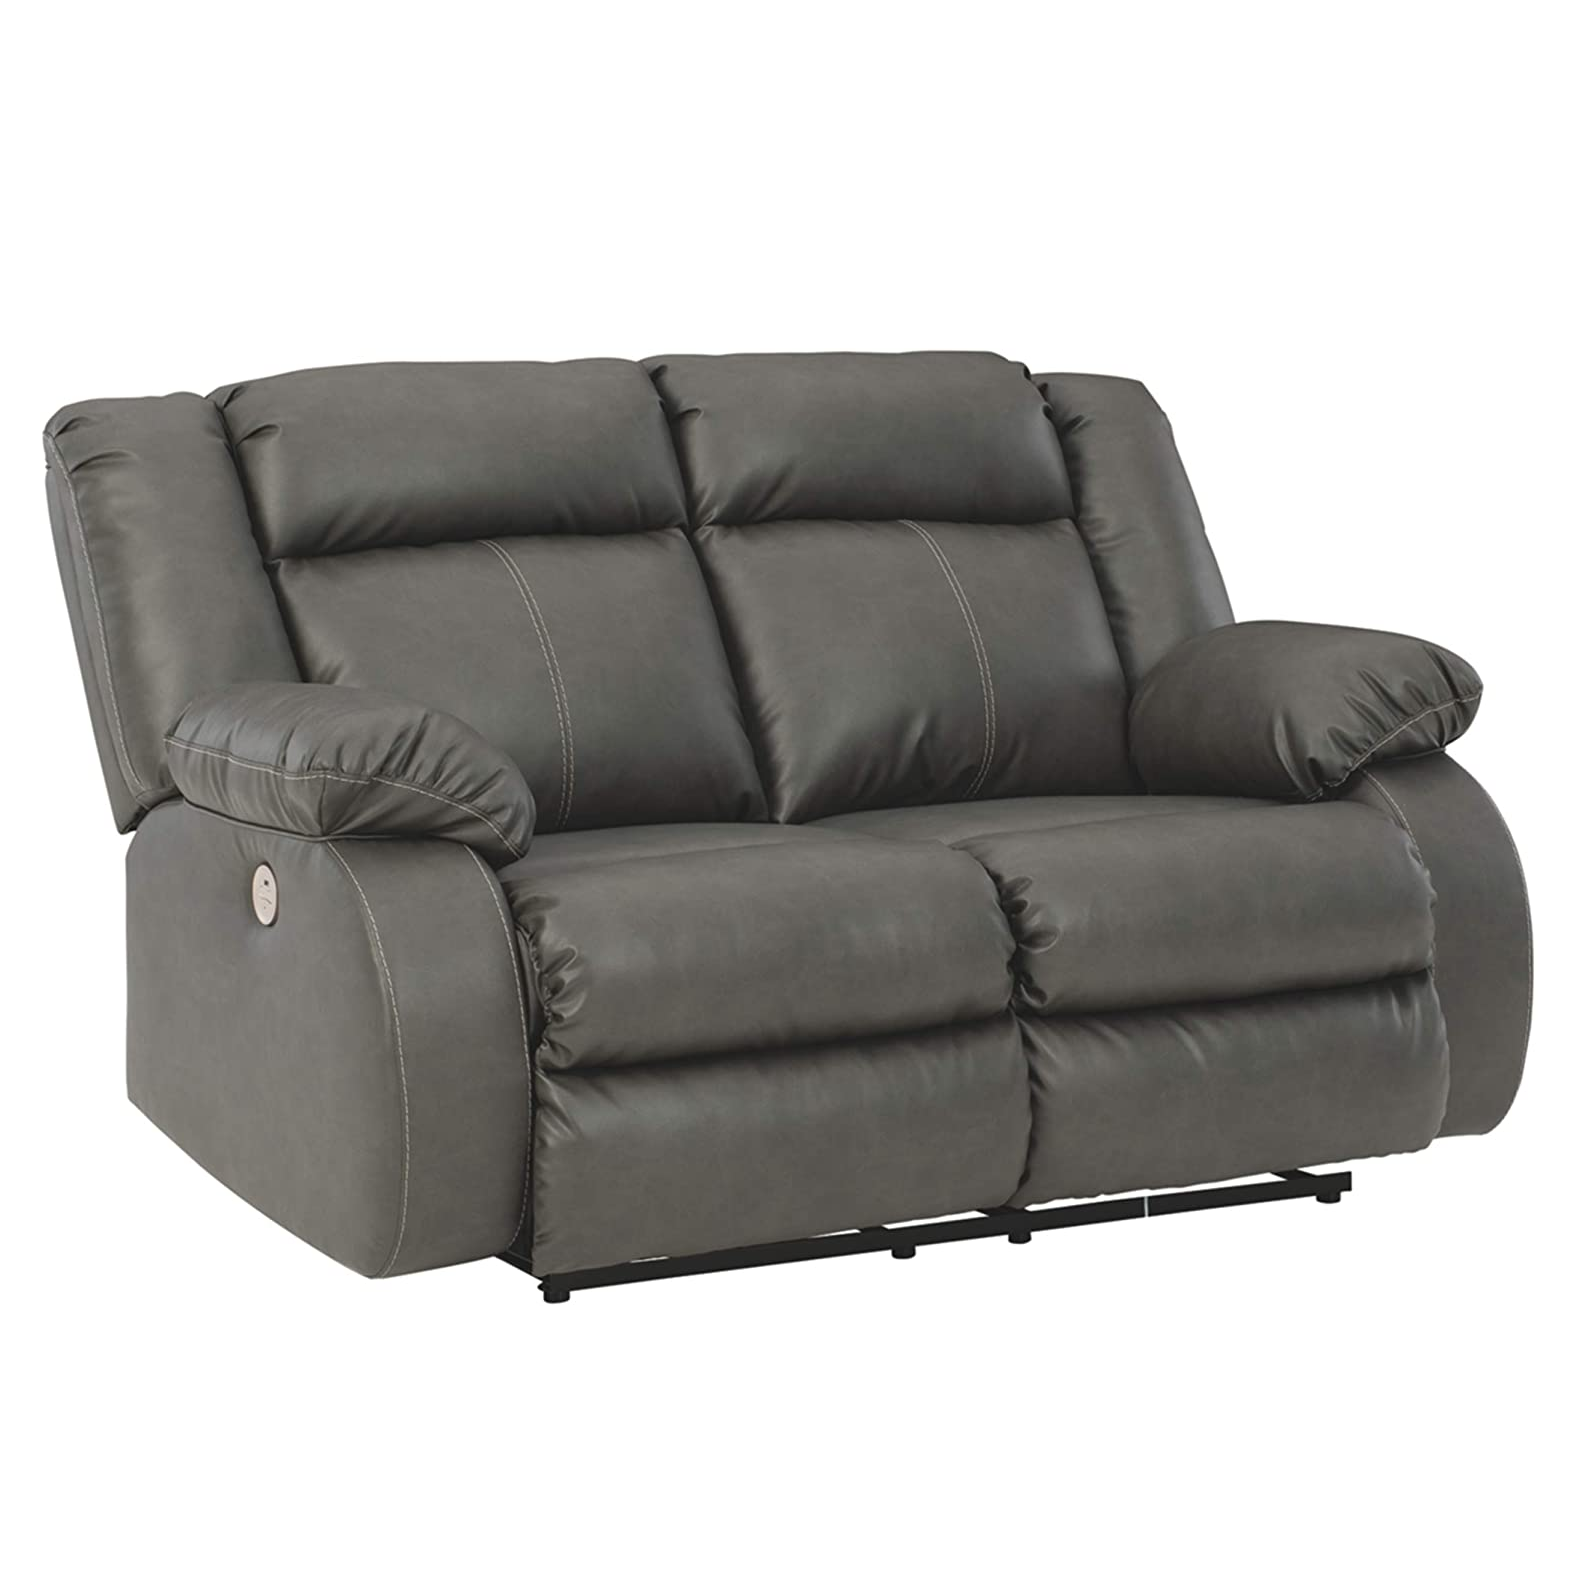 Grey Leather Riser Recliner Chair Factory –  2 Seater Recliner Sofa – JKY